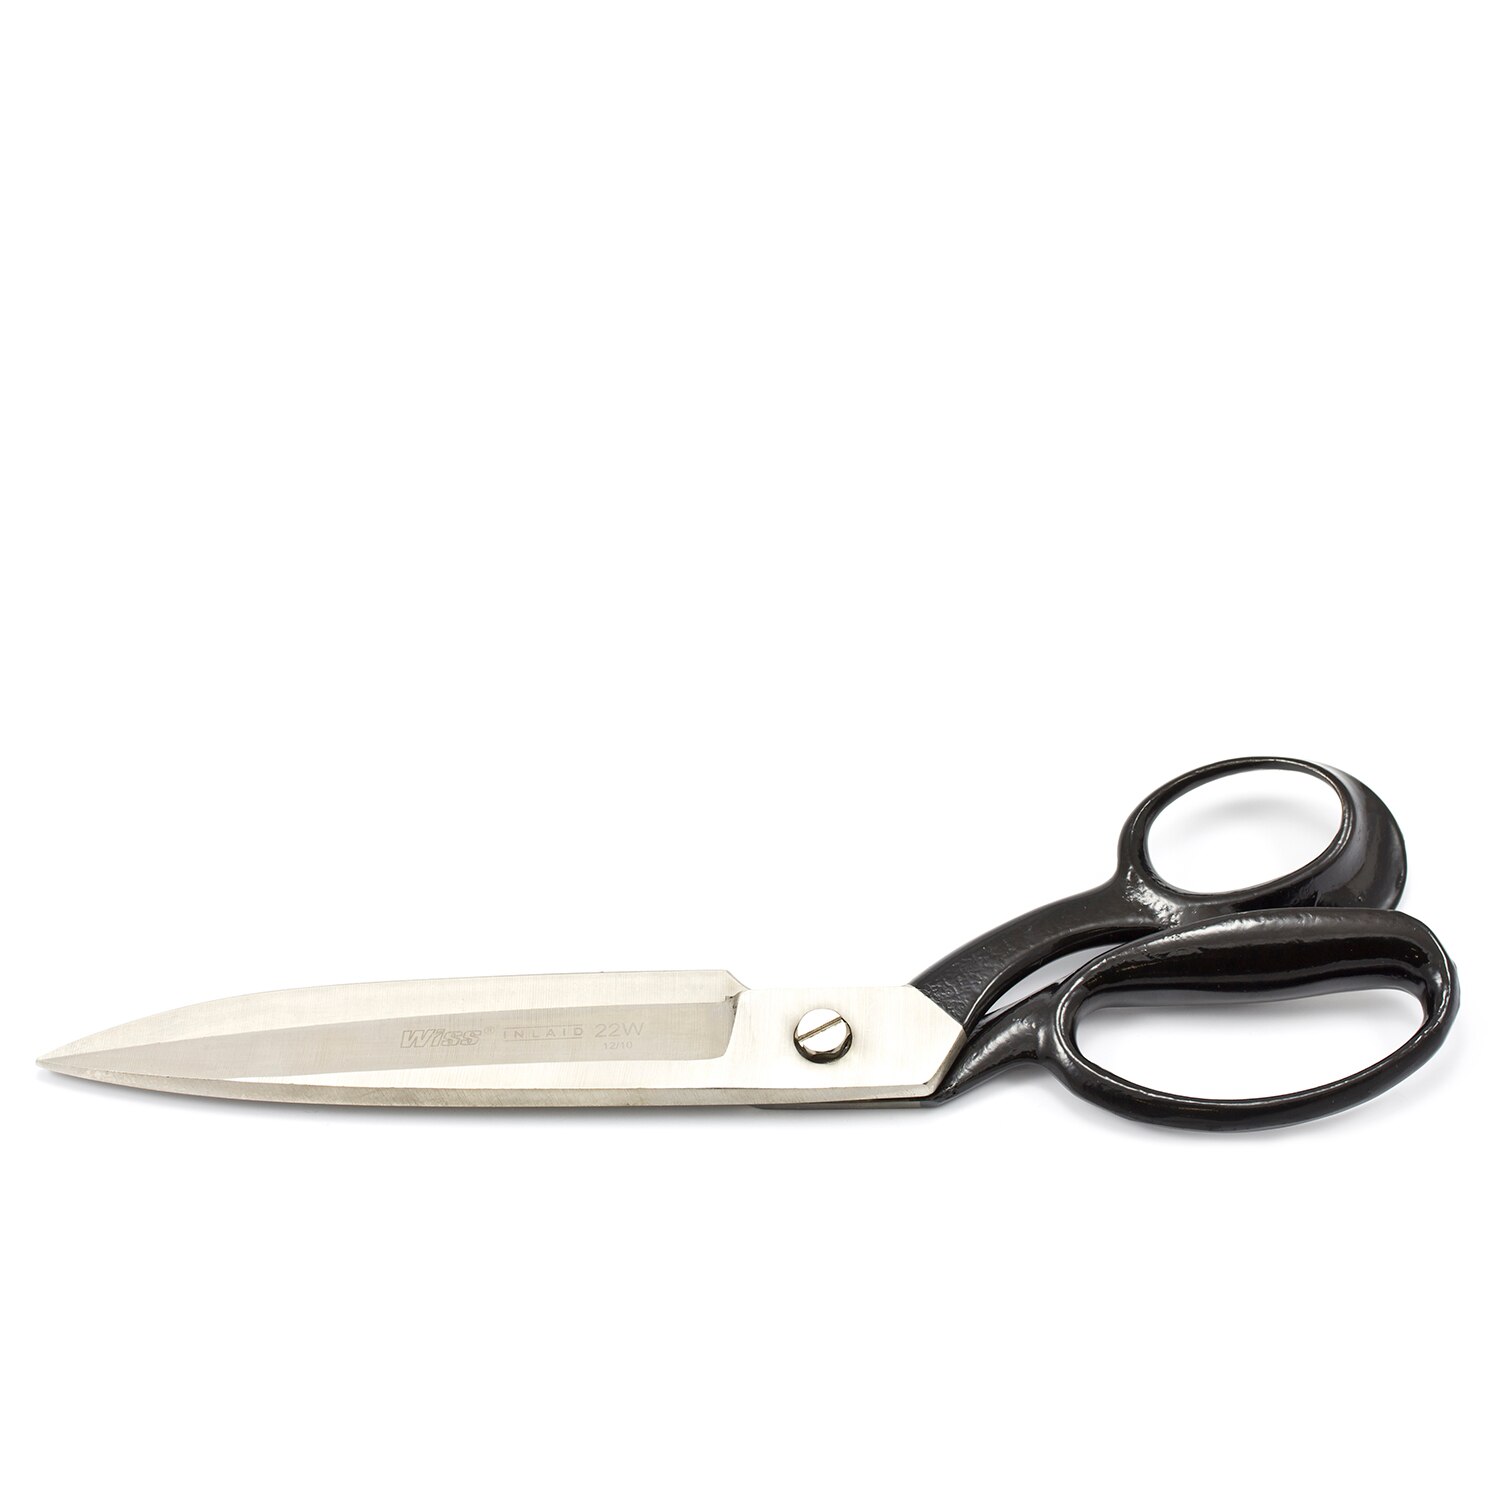 NEW!! Heritage Carpet Shears, Carpet and Heavy Fabric, Offset, Right Hand